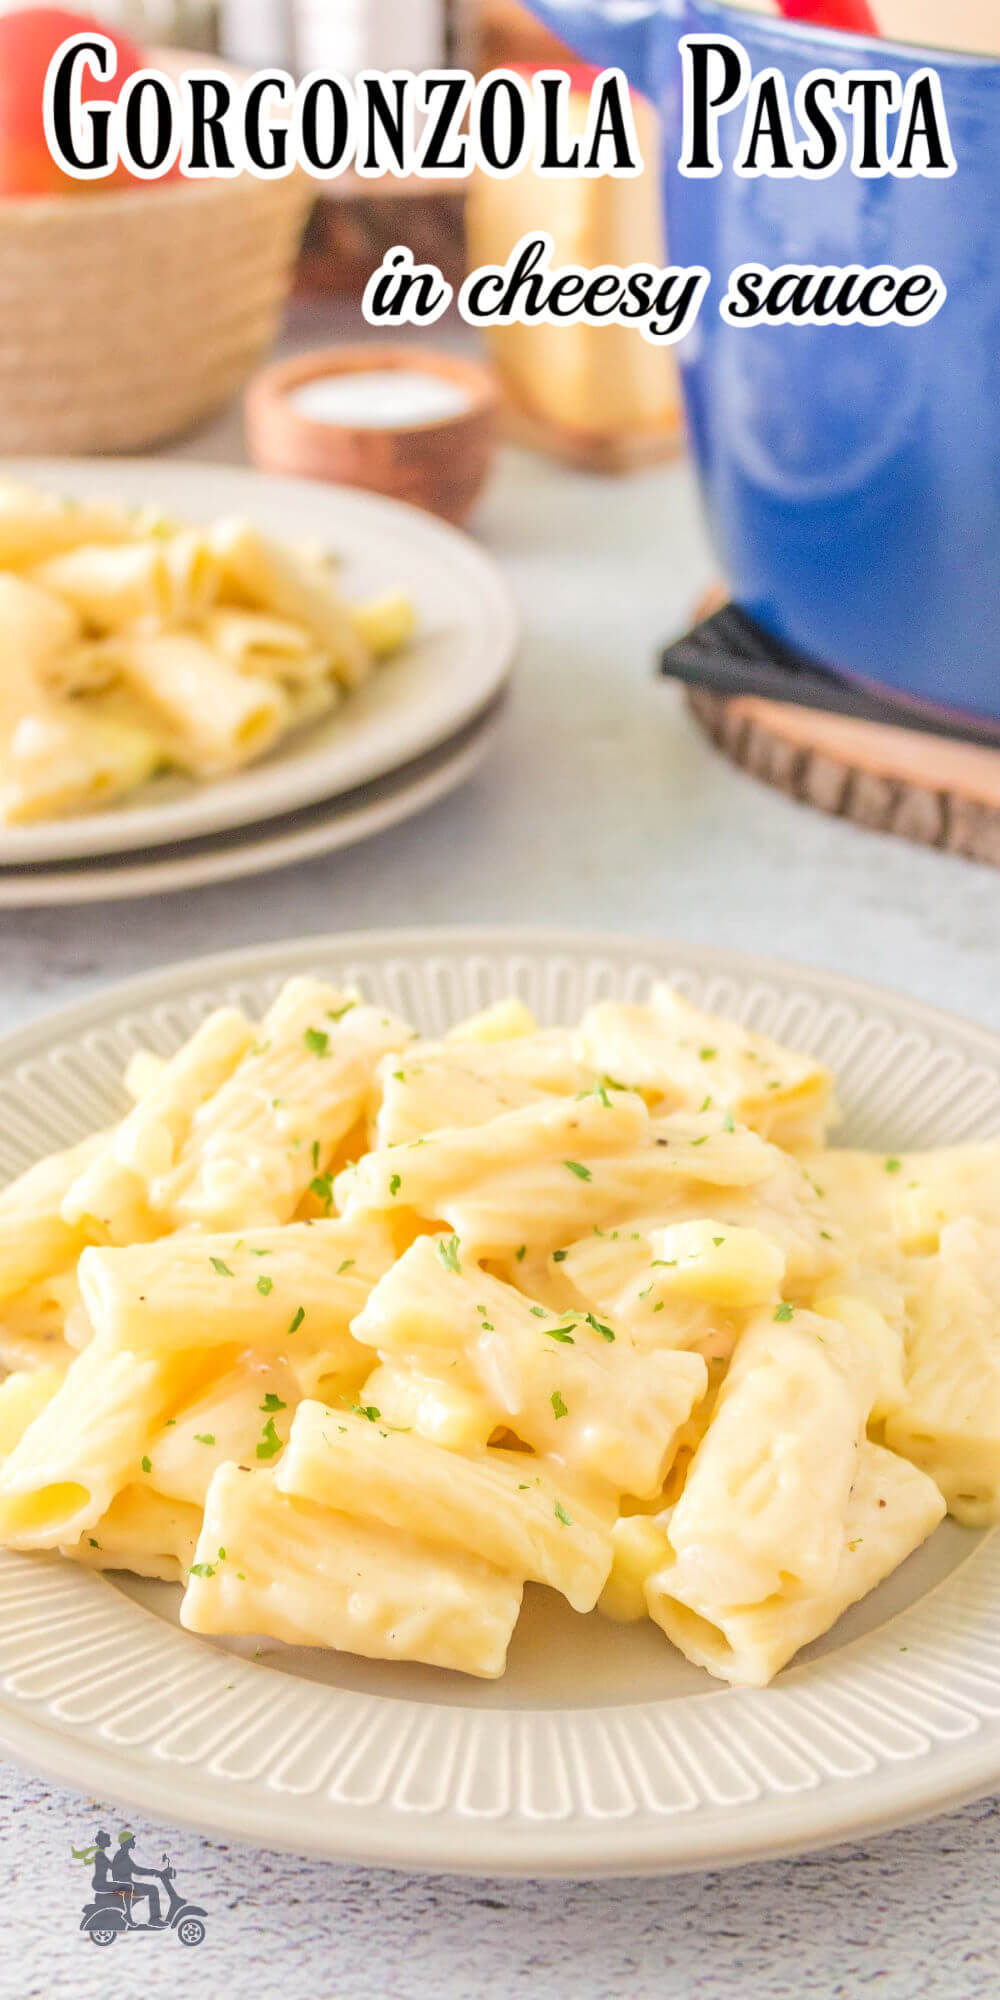 Gorgonzola pasta is a cheese pasta recipe like no other! The surprising combination of apples, onion, and gorgonzola cheese to make this simple cheese sauce is genius! Toss in the al dente pasta and sprinkle each serving with fresh herbs for an easy and irresistible midweek family meal!